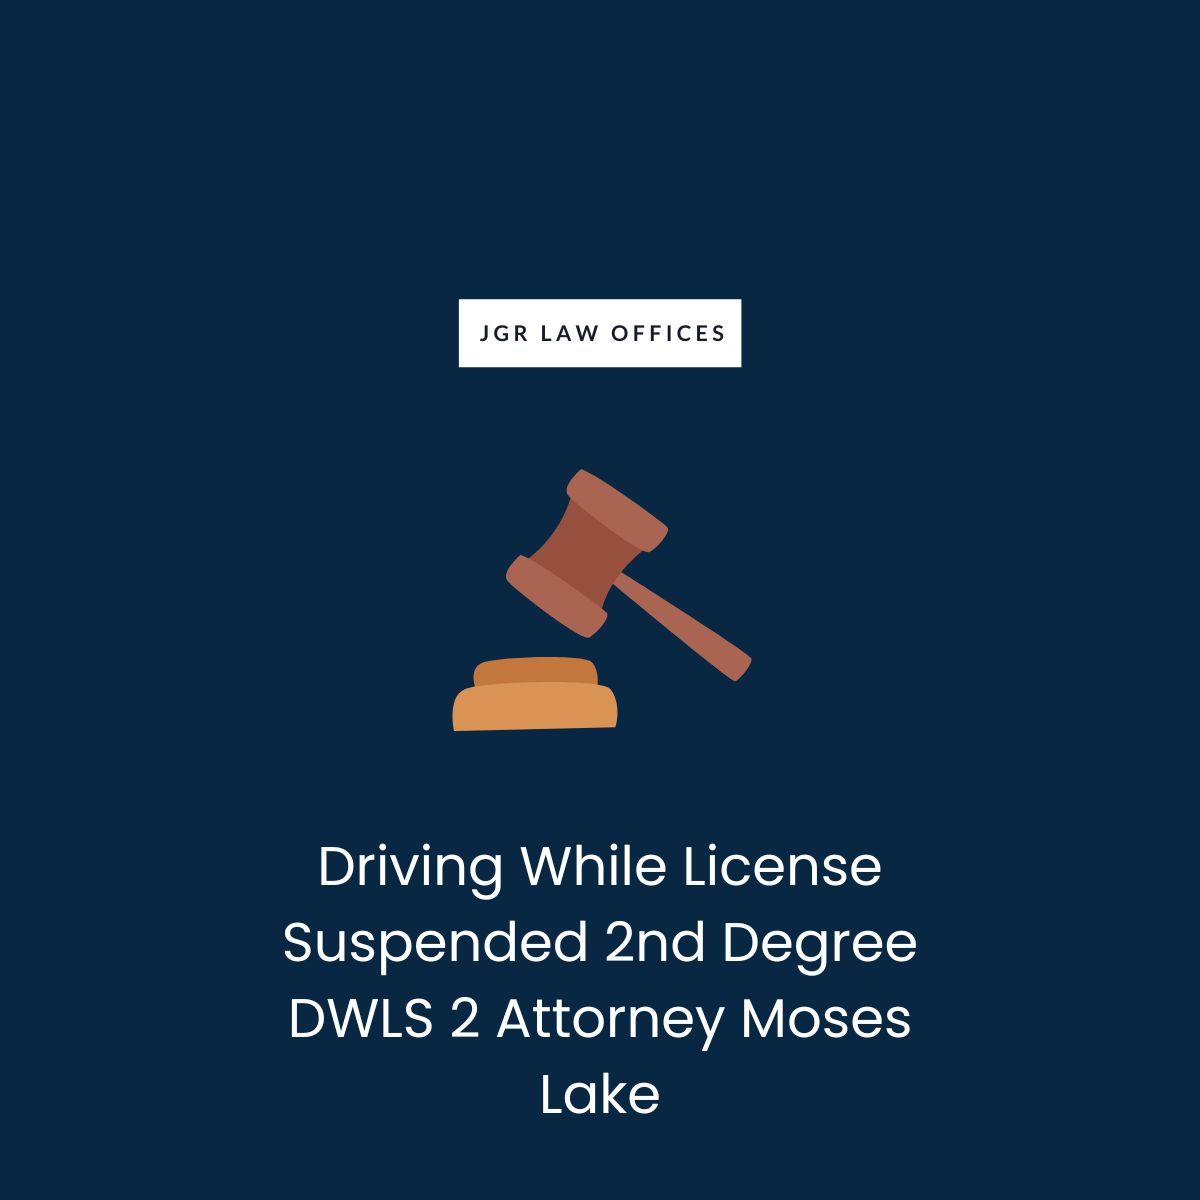 Driving While License Suspended 2nd Degree DWLS 2 Attorney Moses Lake Driving While License Suspended 2nd Degree DWLS 2 Driving While License Suspended 2nd Degree DWLS 2